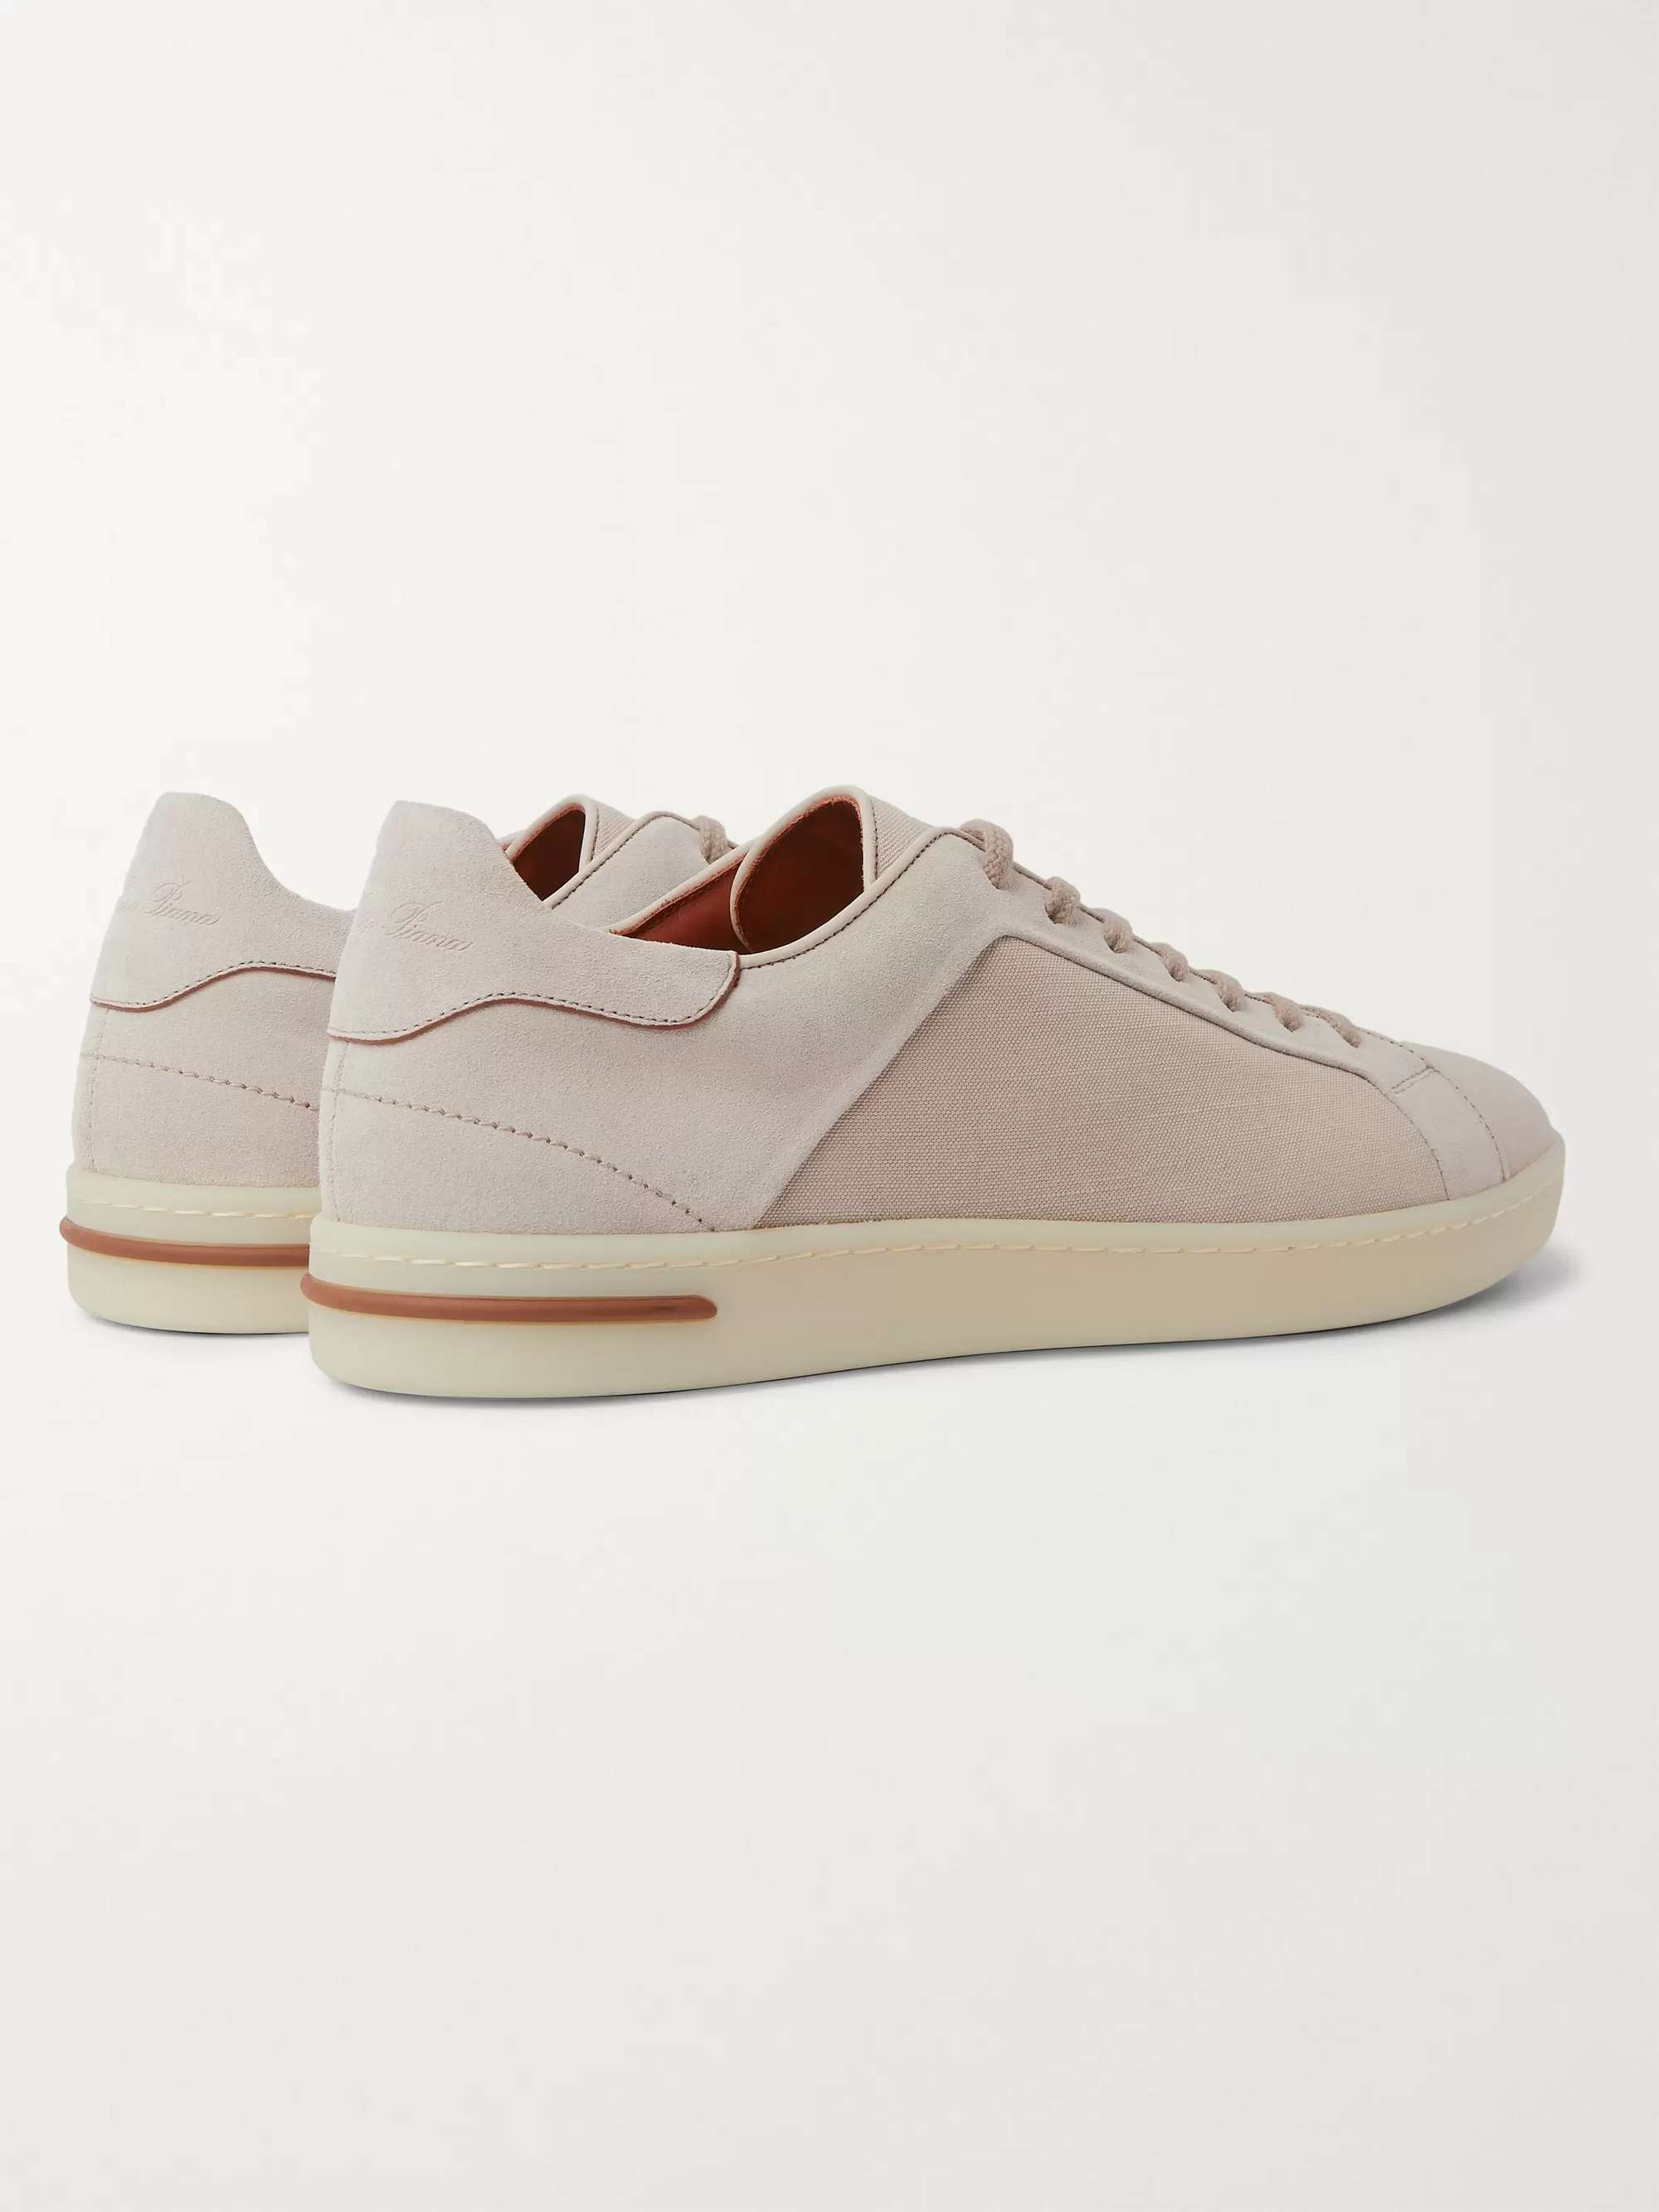 LORO PIANA Traveller Suede and Canvas Sneakers